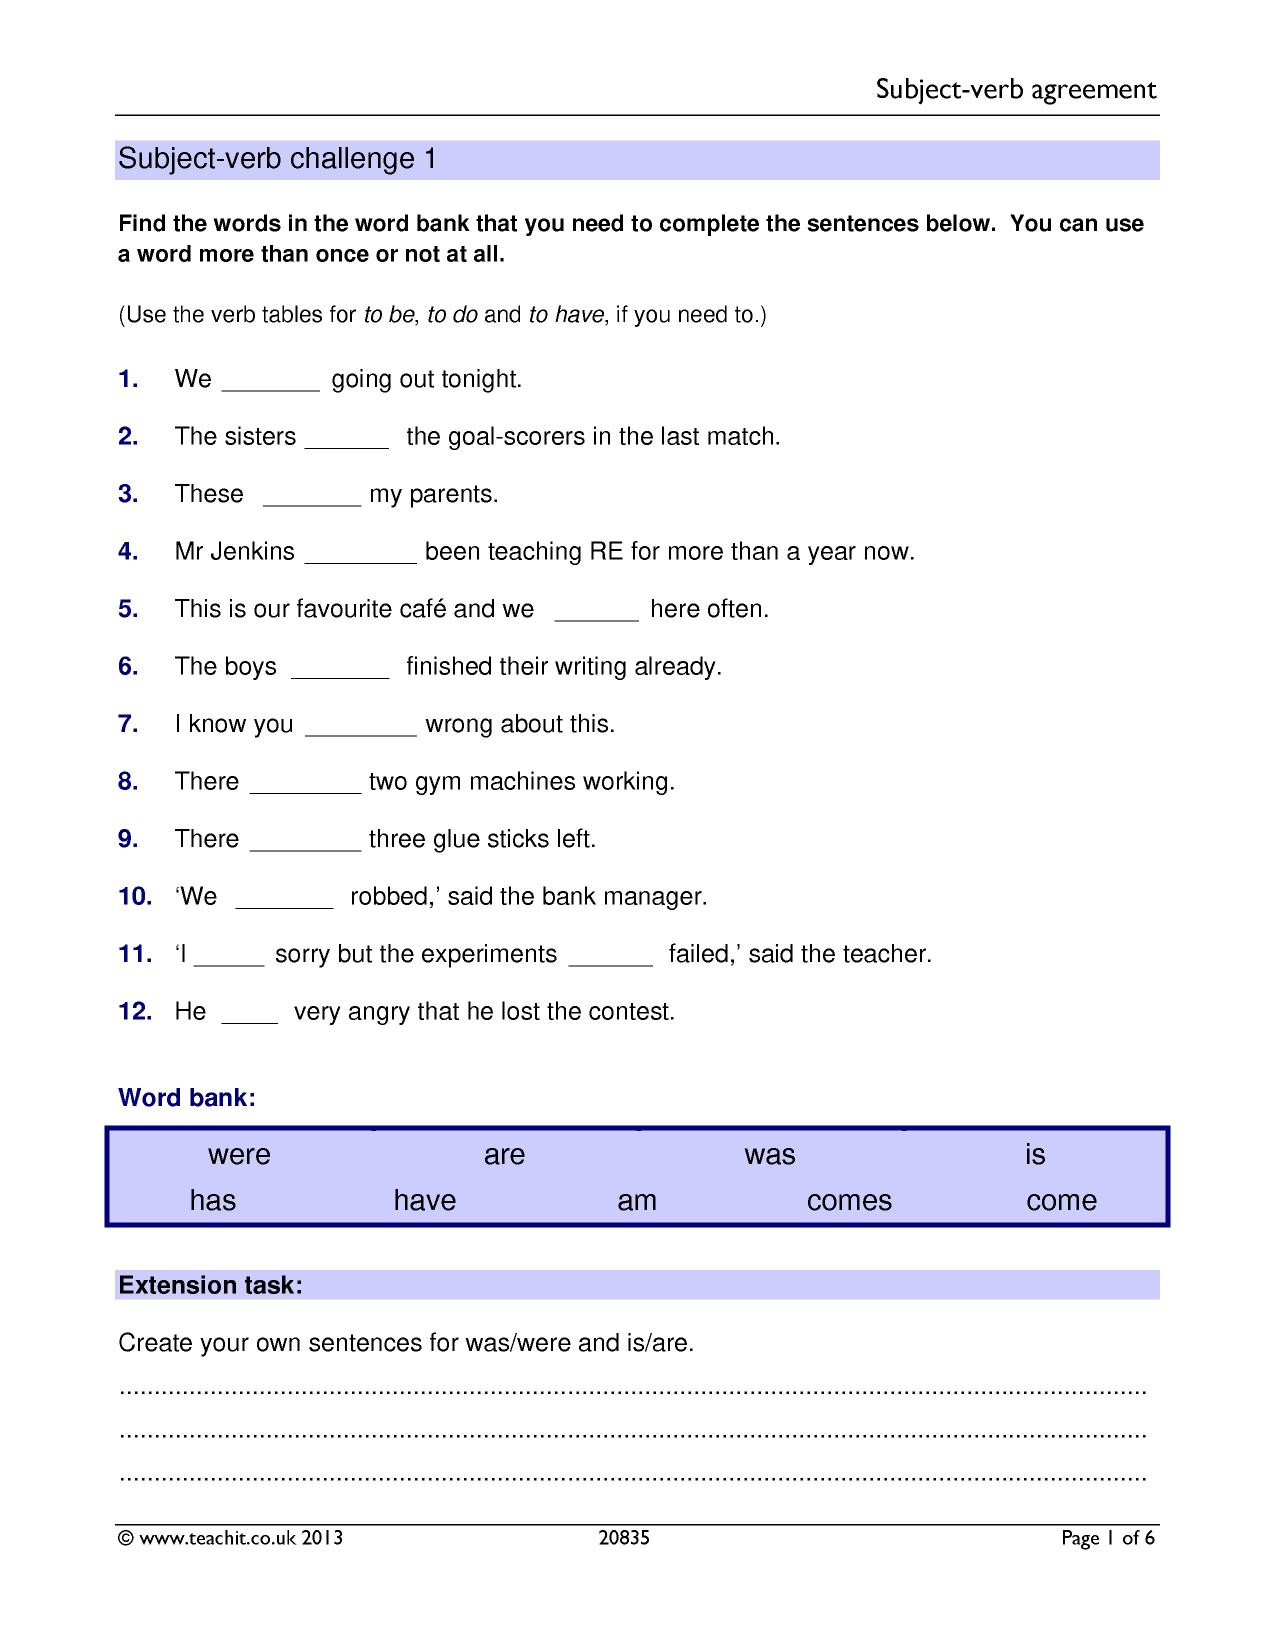 Subject Verb Agreement Proofreading Worksheets